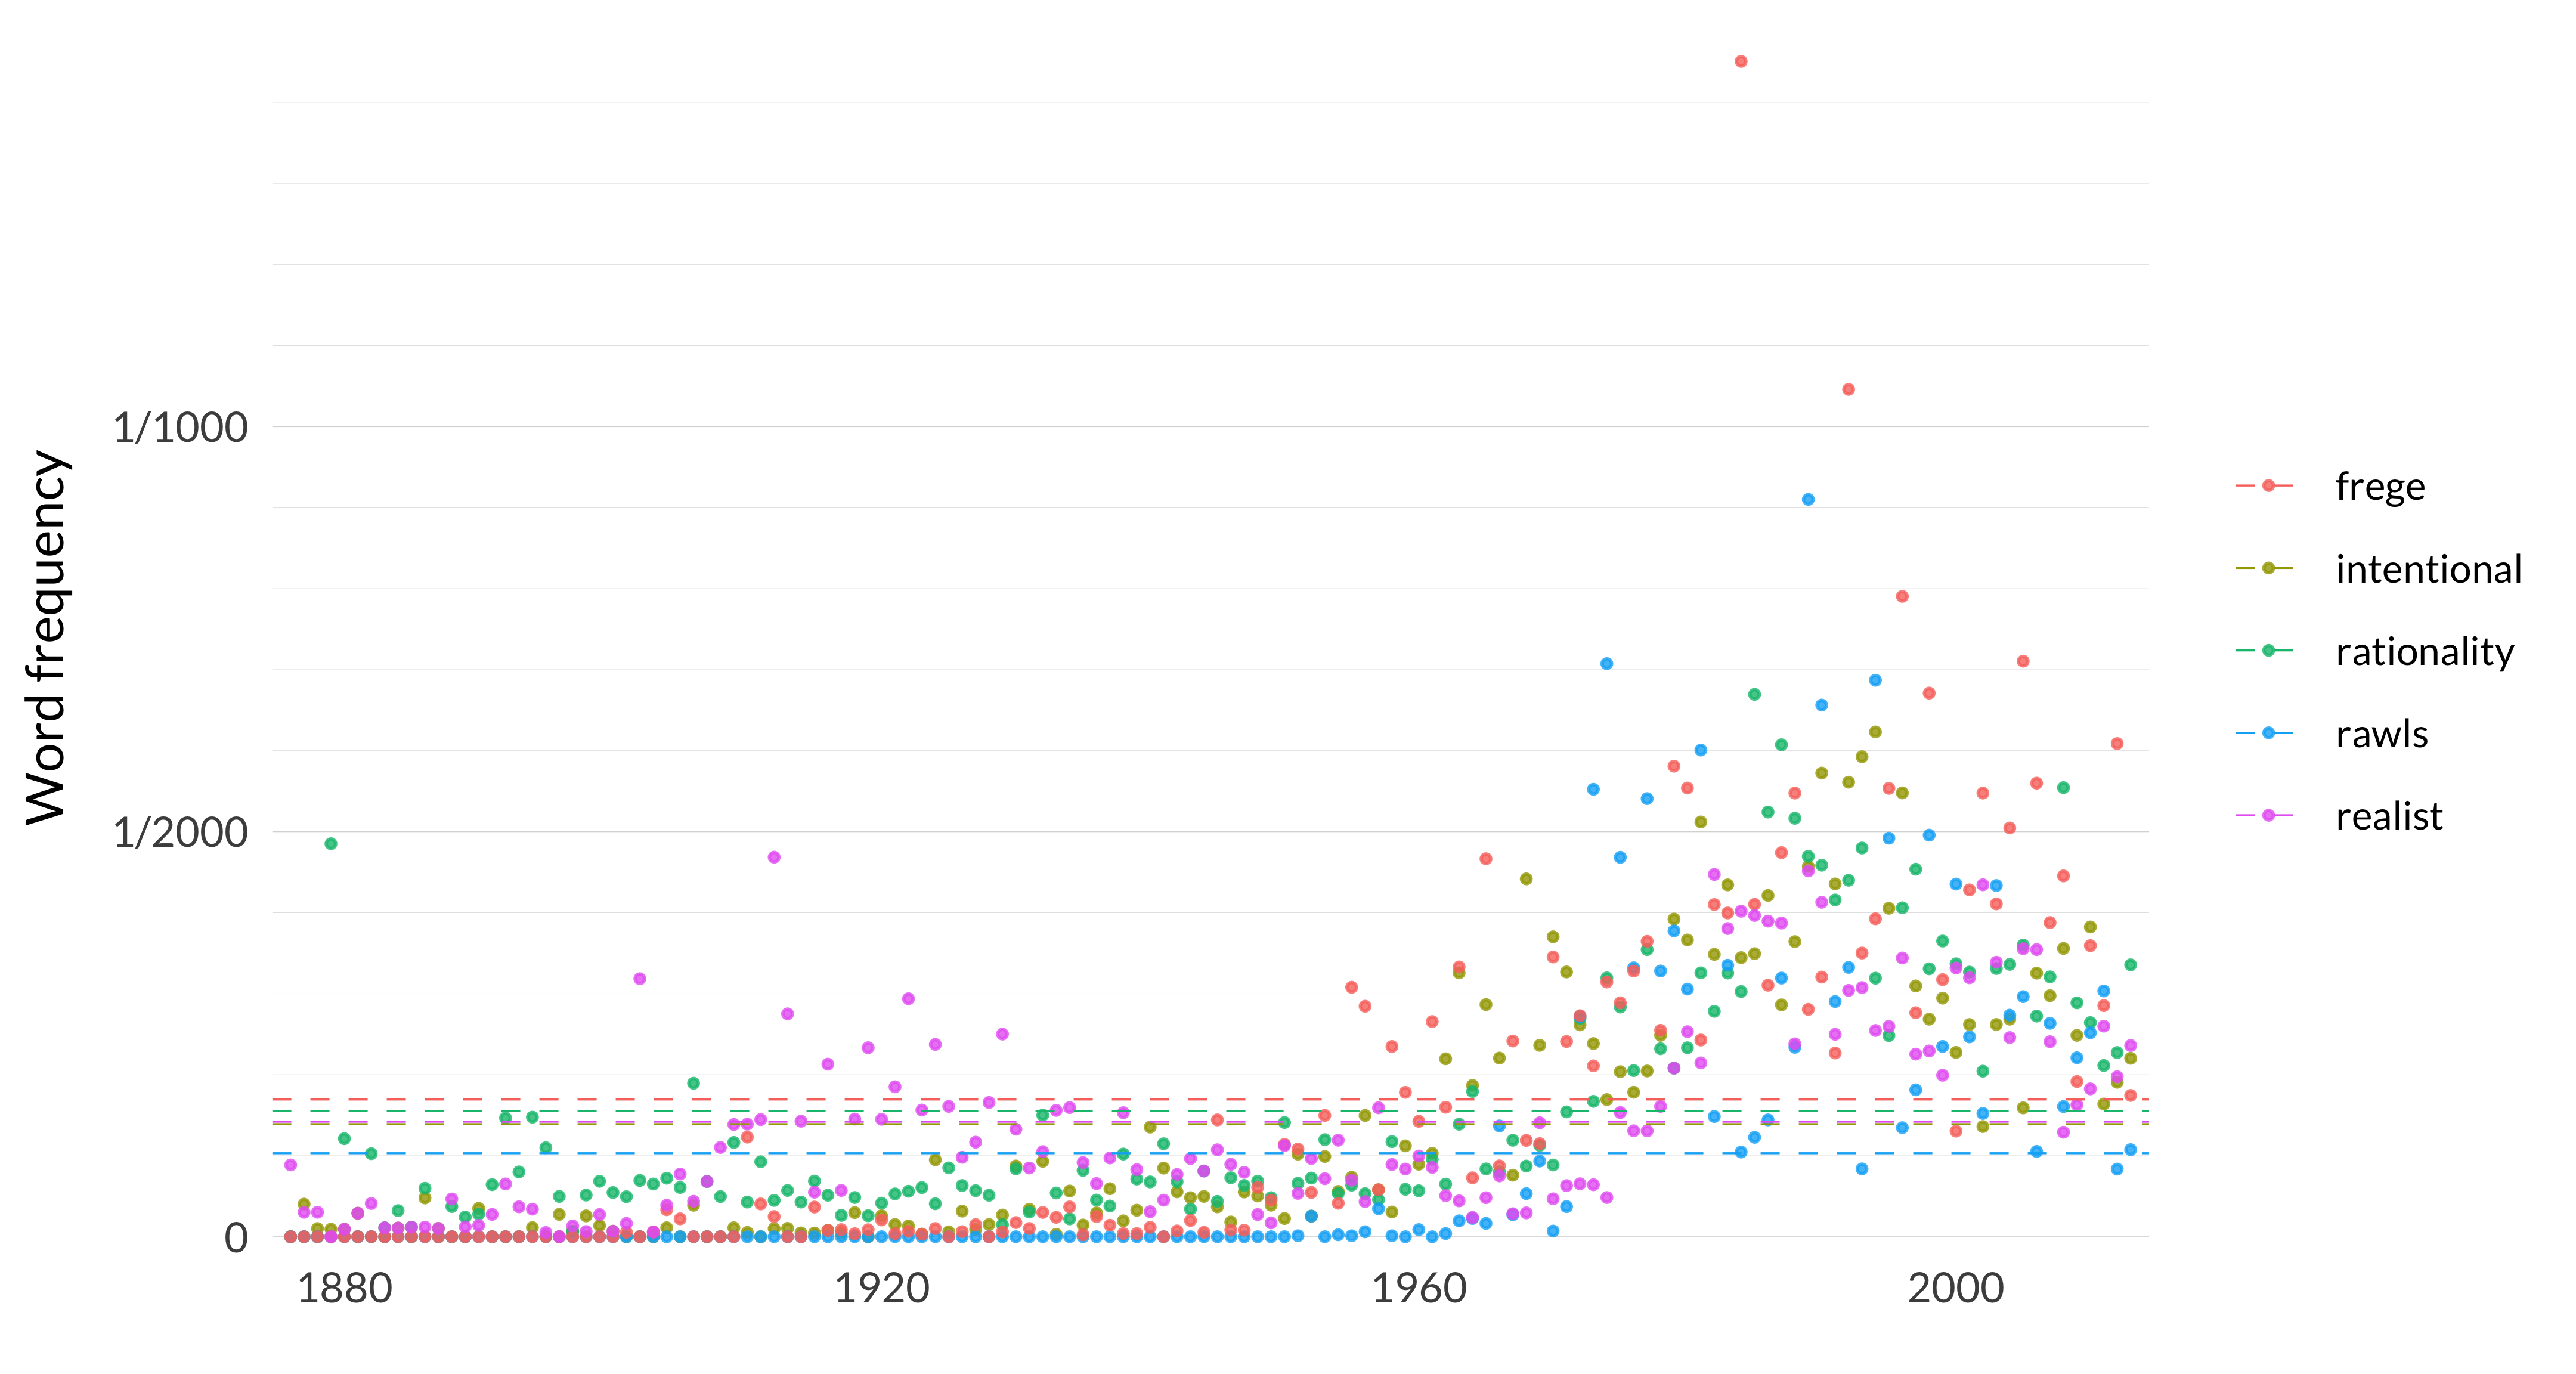 A scatterplot showing the frequency of the words intentional, rationality, rawls, frege, realist. The word intentional appears, on average across the years, 139 times per million words, and in the median year, it appears 55 times per million words. Its most frequent occurrence is in 1994 when it appears 623 times per million words, and its least frequent occurrence is in 1876 when it appears 0 times per million words. The word rationality appears, on average across the years, 155 times per million words, and in the median year, it appears 82 times per million words. Its most frequent occurrence is in 1985 when it appears 670 times per million words, and its least frequent occurrence is in 1876 when it appears 0 times per million words. The word rawls appears, on average across the years, 103 times per million words, and in the median year, it appears 0 times per million words. Its most frequent occurrence is in 1989 when it appears 910 times per million words, and its least frequent occurrence is in 1876 when it appears 0 times per million words. The word frege appears, on average across the years, 169 times per million words, and in the median year, it appears 38 times per million words. Its most frequent occurrence is in 1984 when it appears 1451 times per million words, and its least frequent occurrence is in 1876 when it appears 0 times per million words. The word realist appears, on average across the years, 142 times per million words, and in the median year, it appears 102 times per million words. Its most frequent occurrence is in 1912 when it appears 469 times per million words, and its least frequent occurrence is in 1879 when it appears 0 times per million words. 